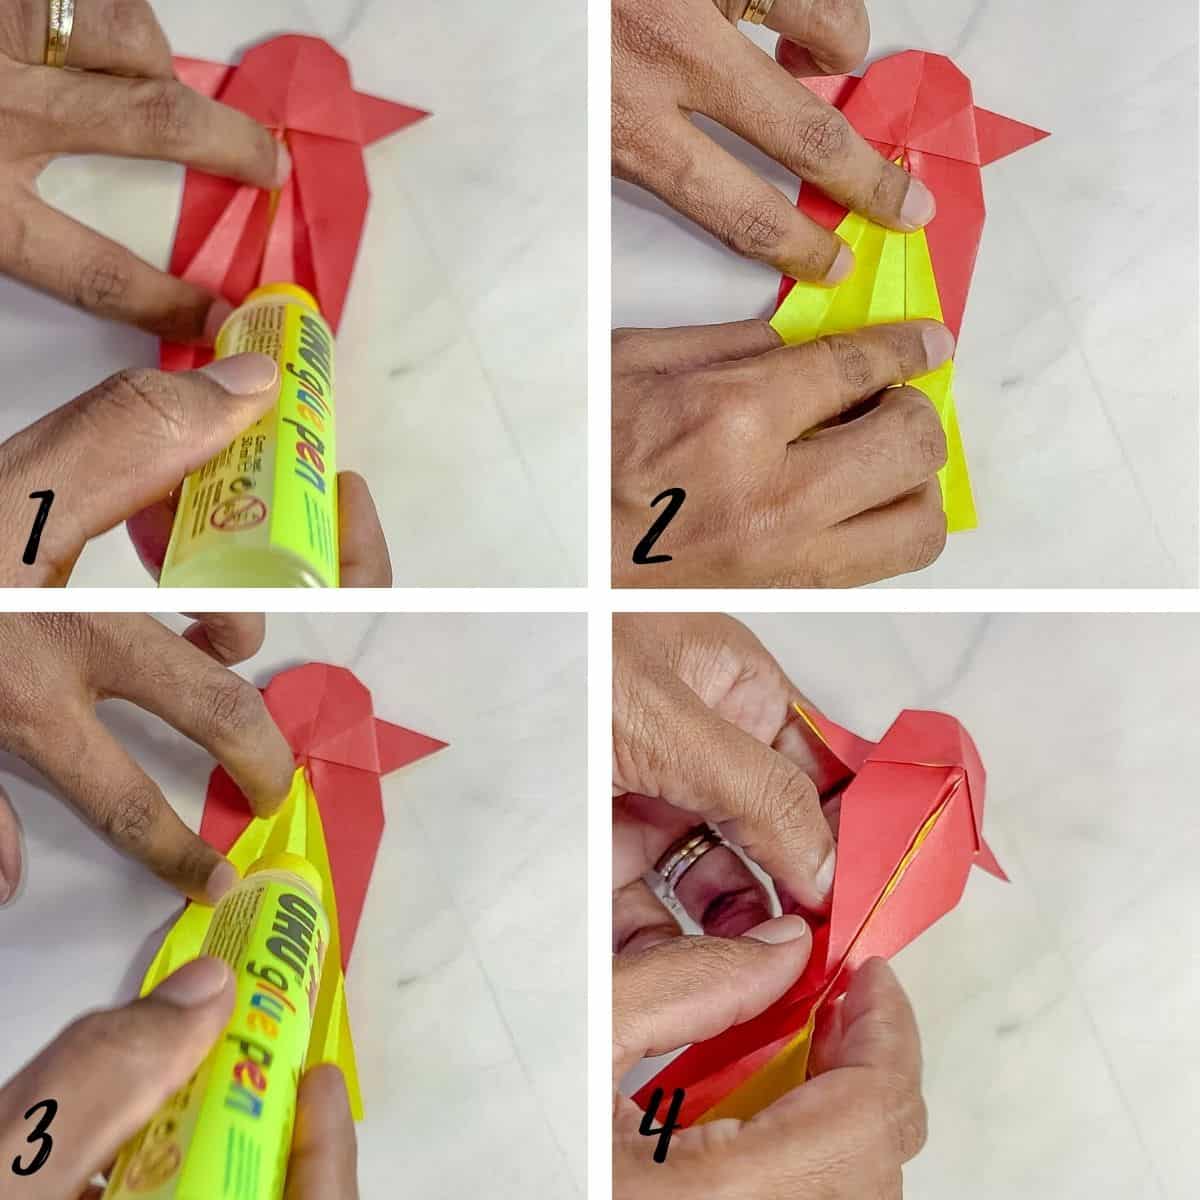 A poster of 4 images showing how to apply glue to paper koi fish.